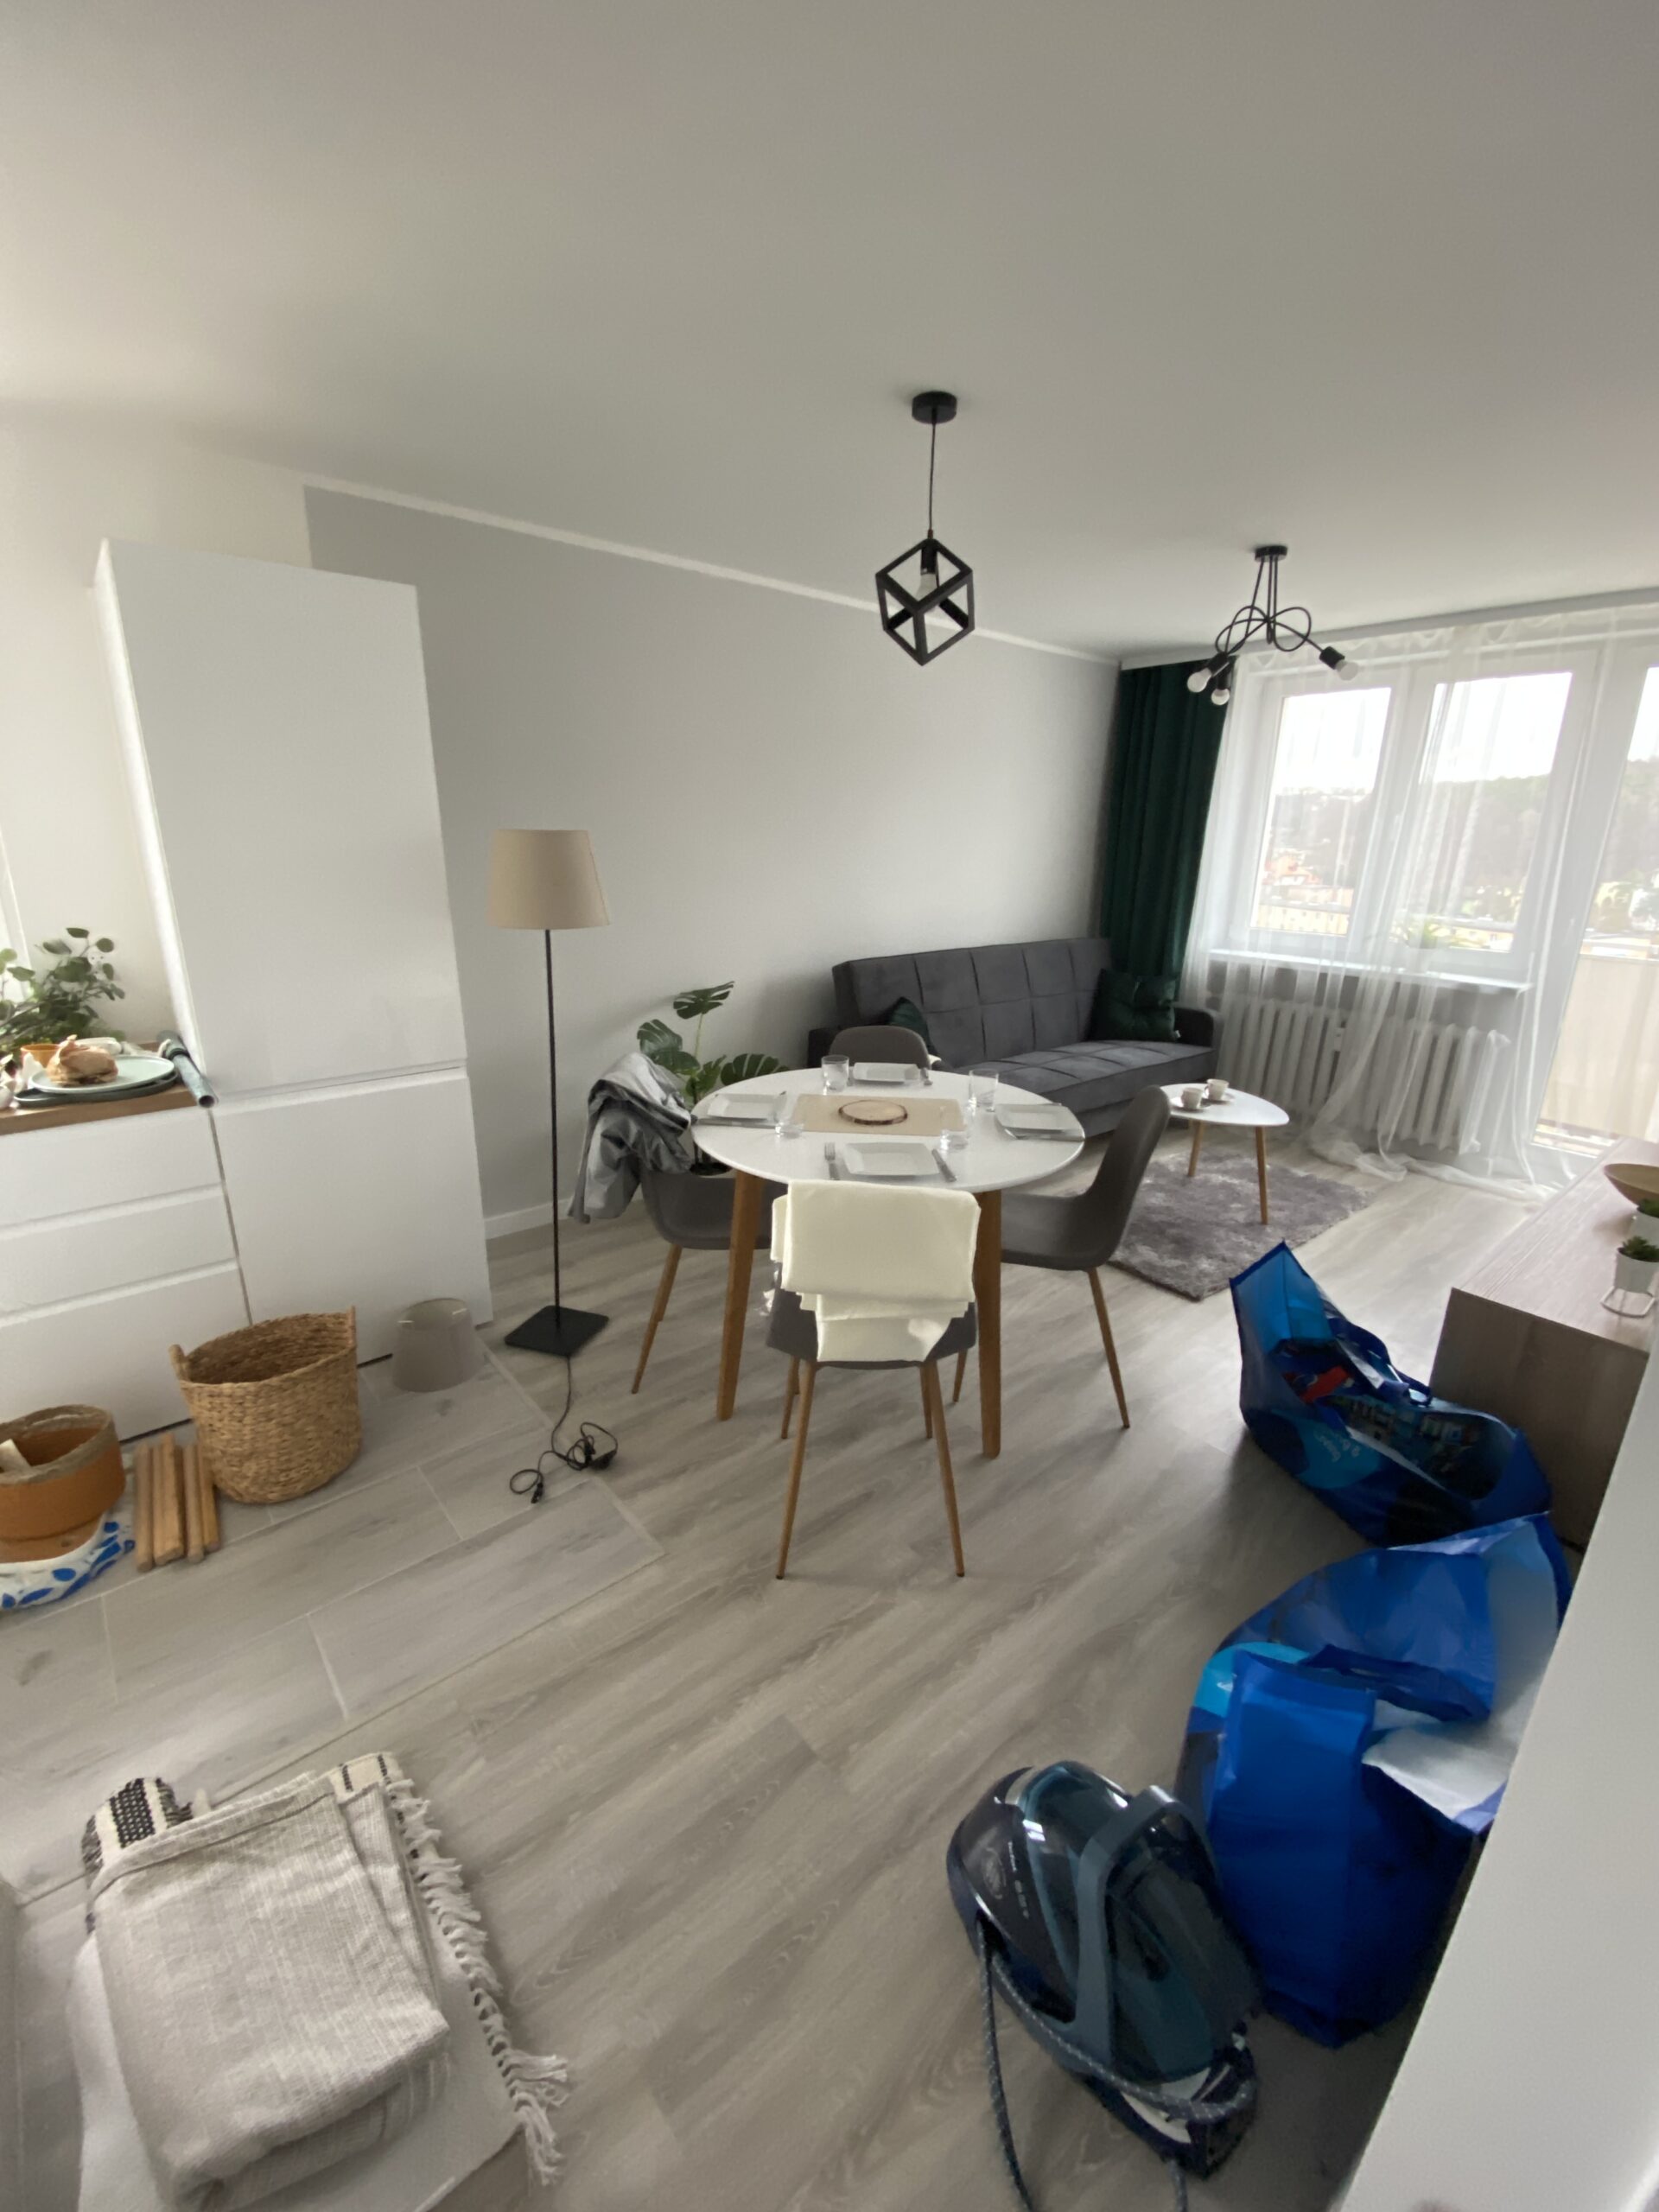 Gdynia Chylonia Home Staging